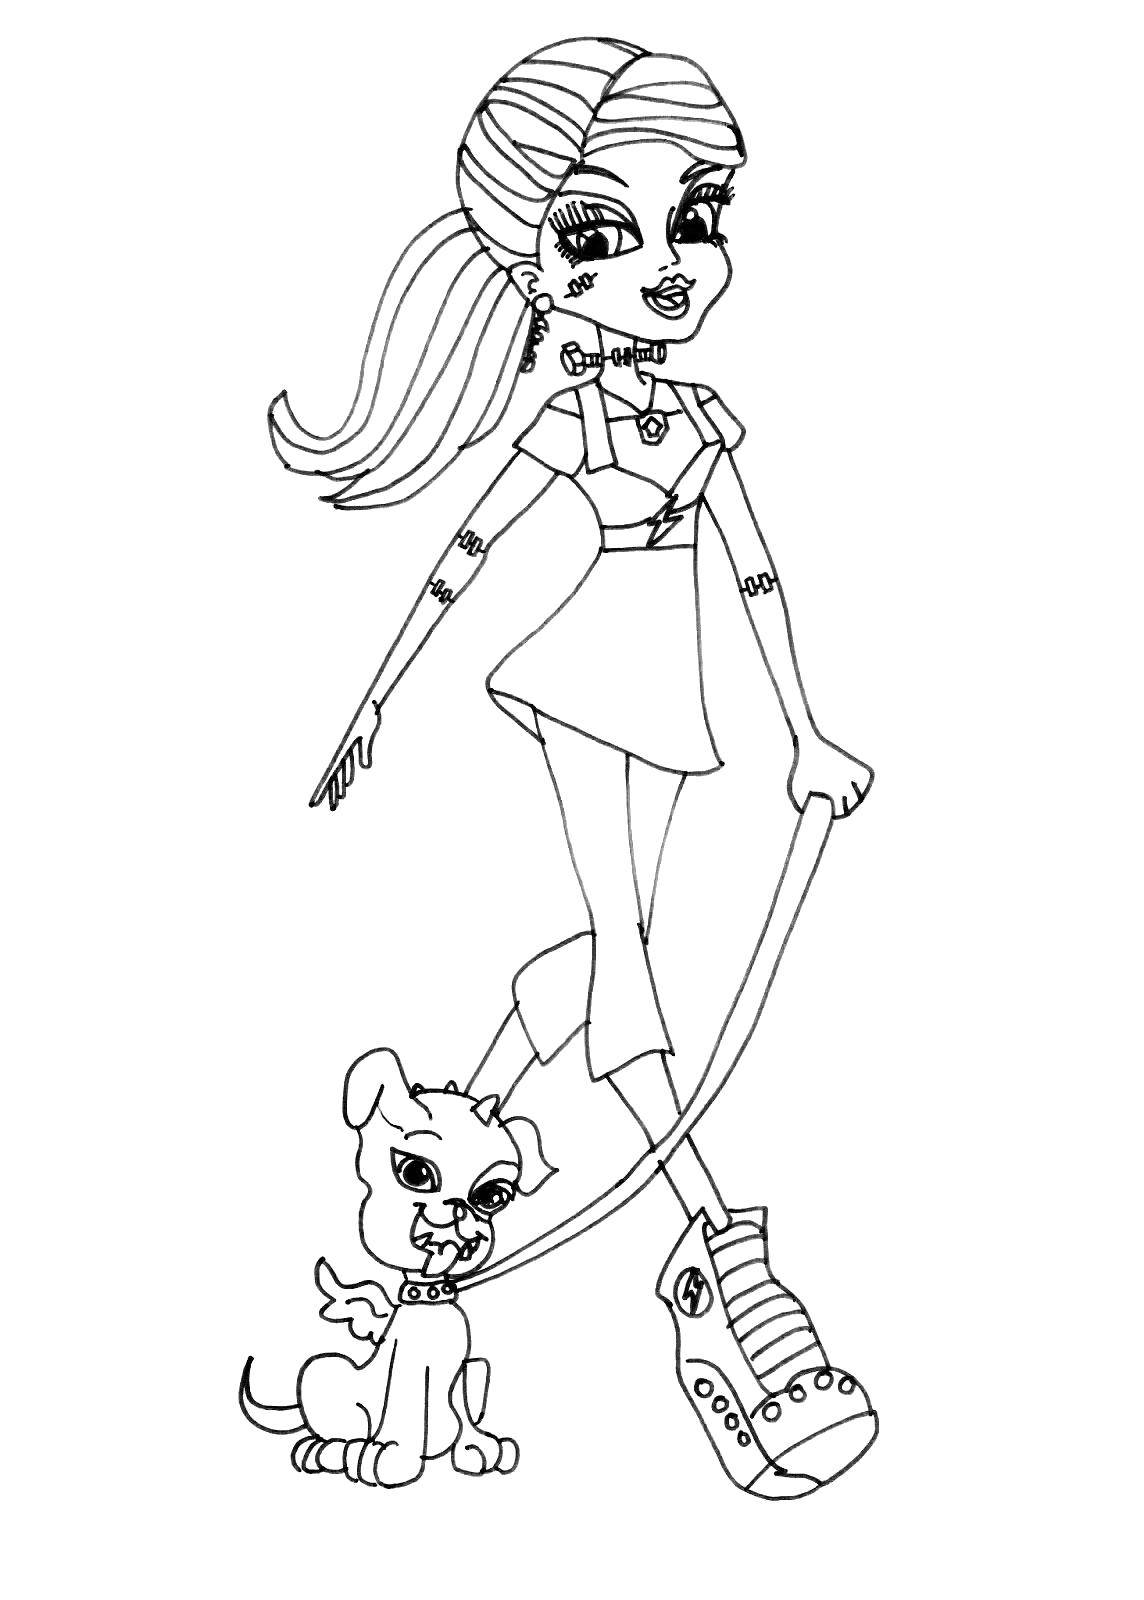 Coloring She-beast with a dog. Category monster high. Tags:  Monster High.